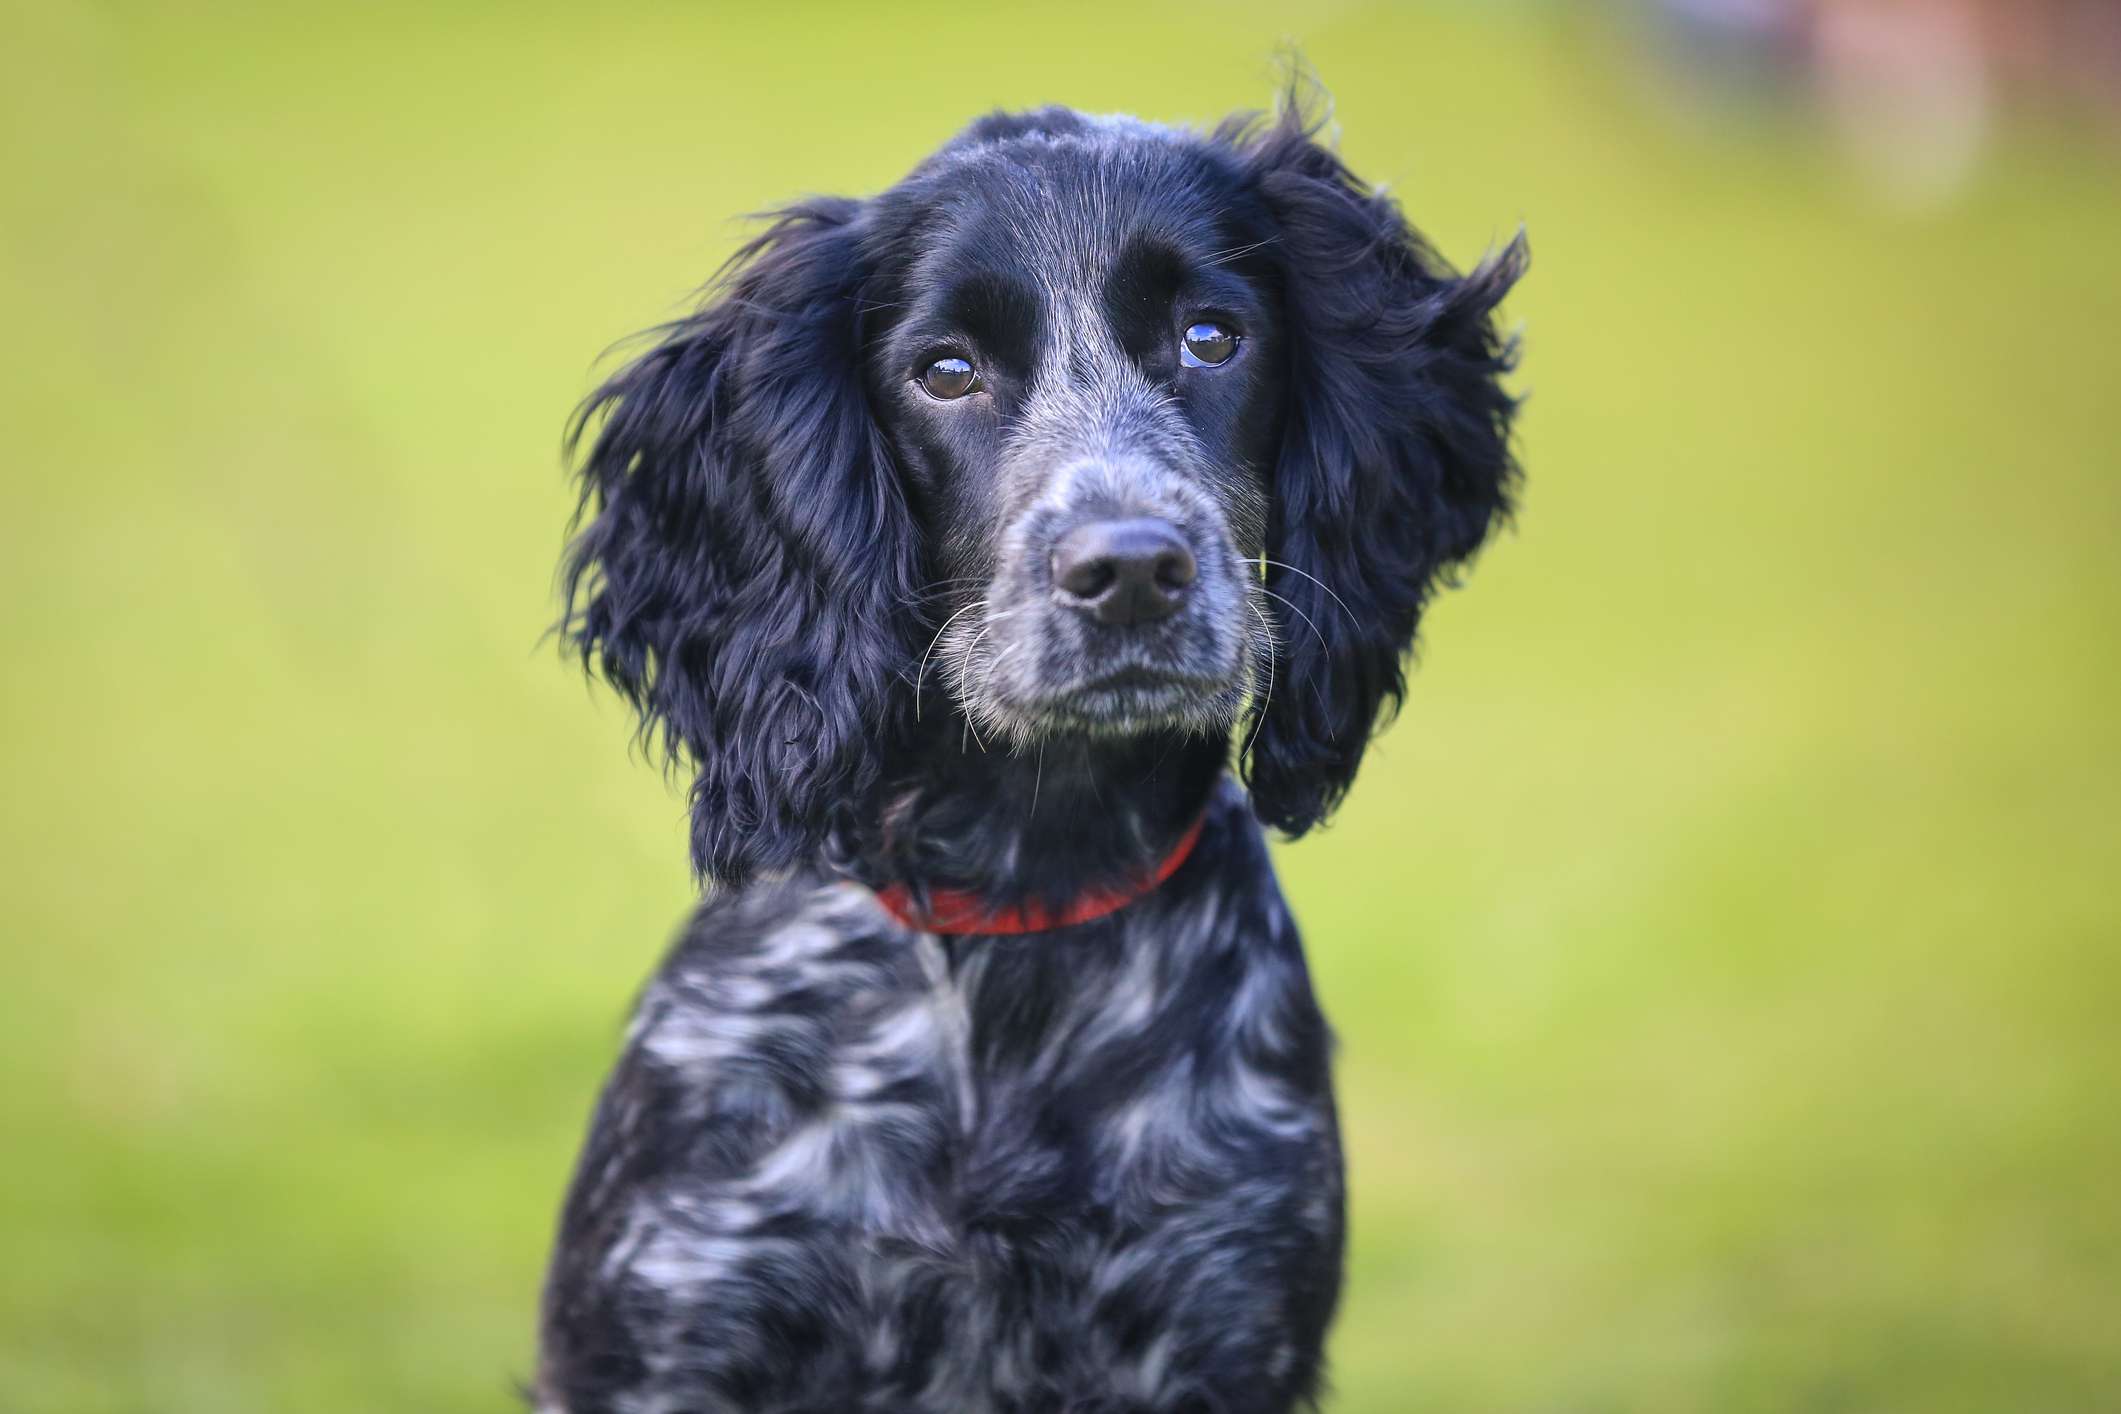 Black and white ticked English Cocker Spaniel against green background